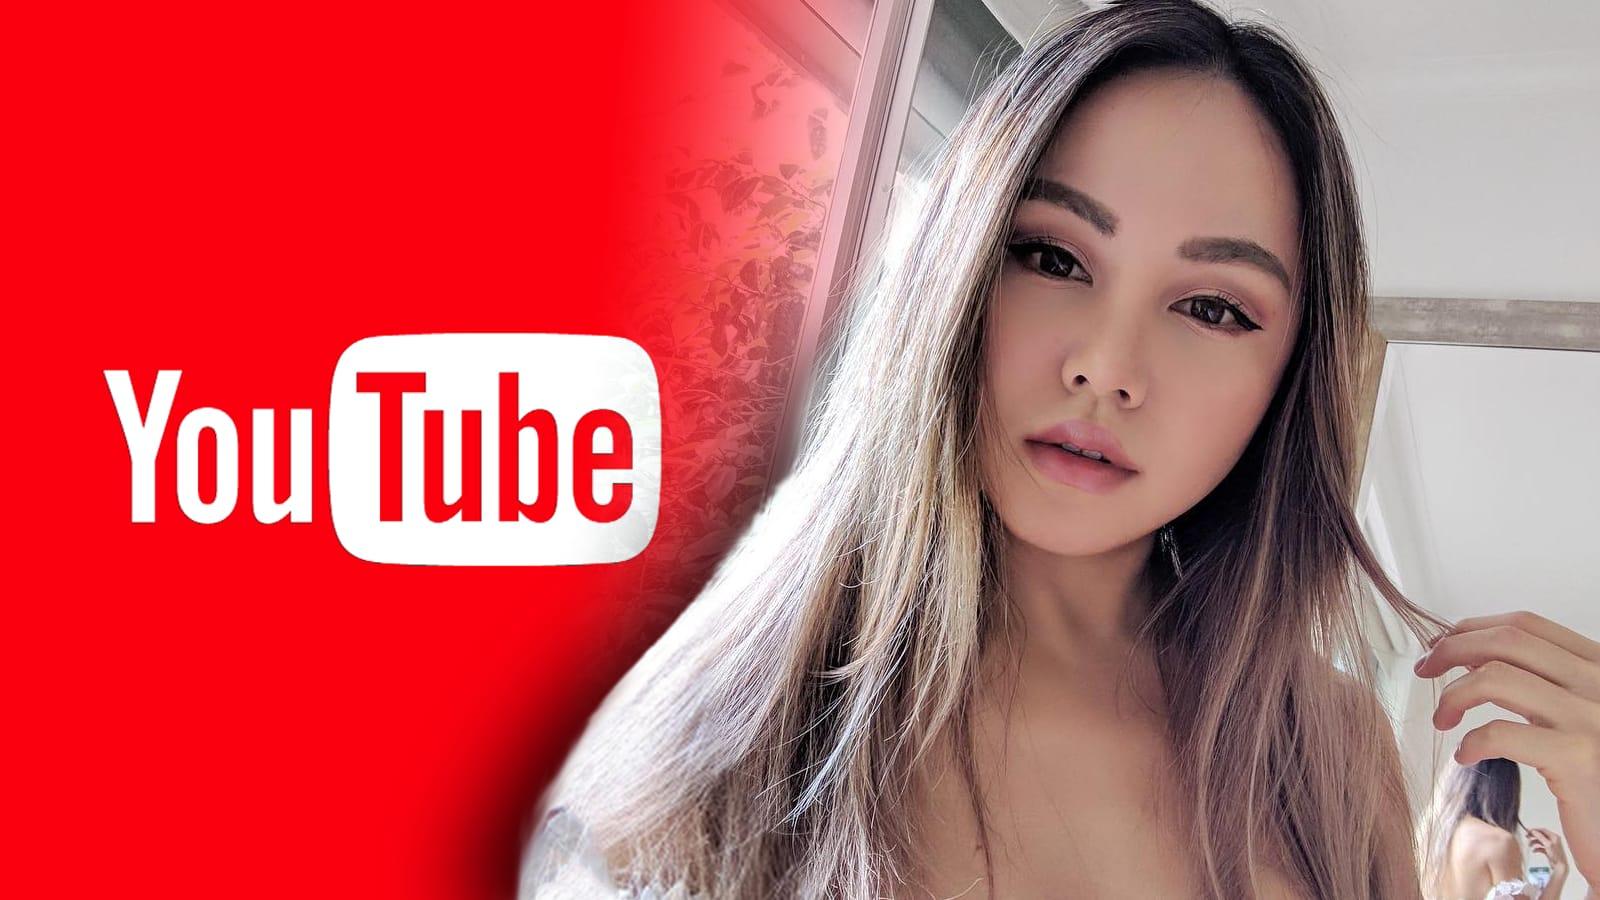 Chloe Ting reveals she may end YouTube career: "I don't know if it's worth it"